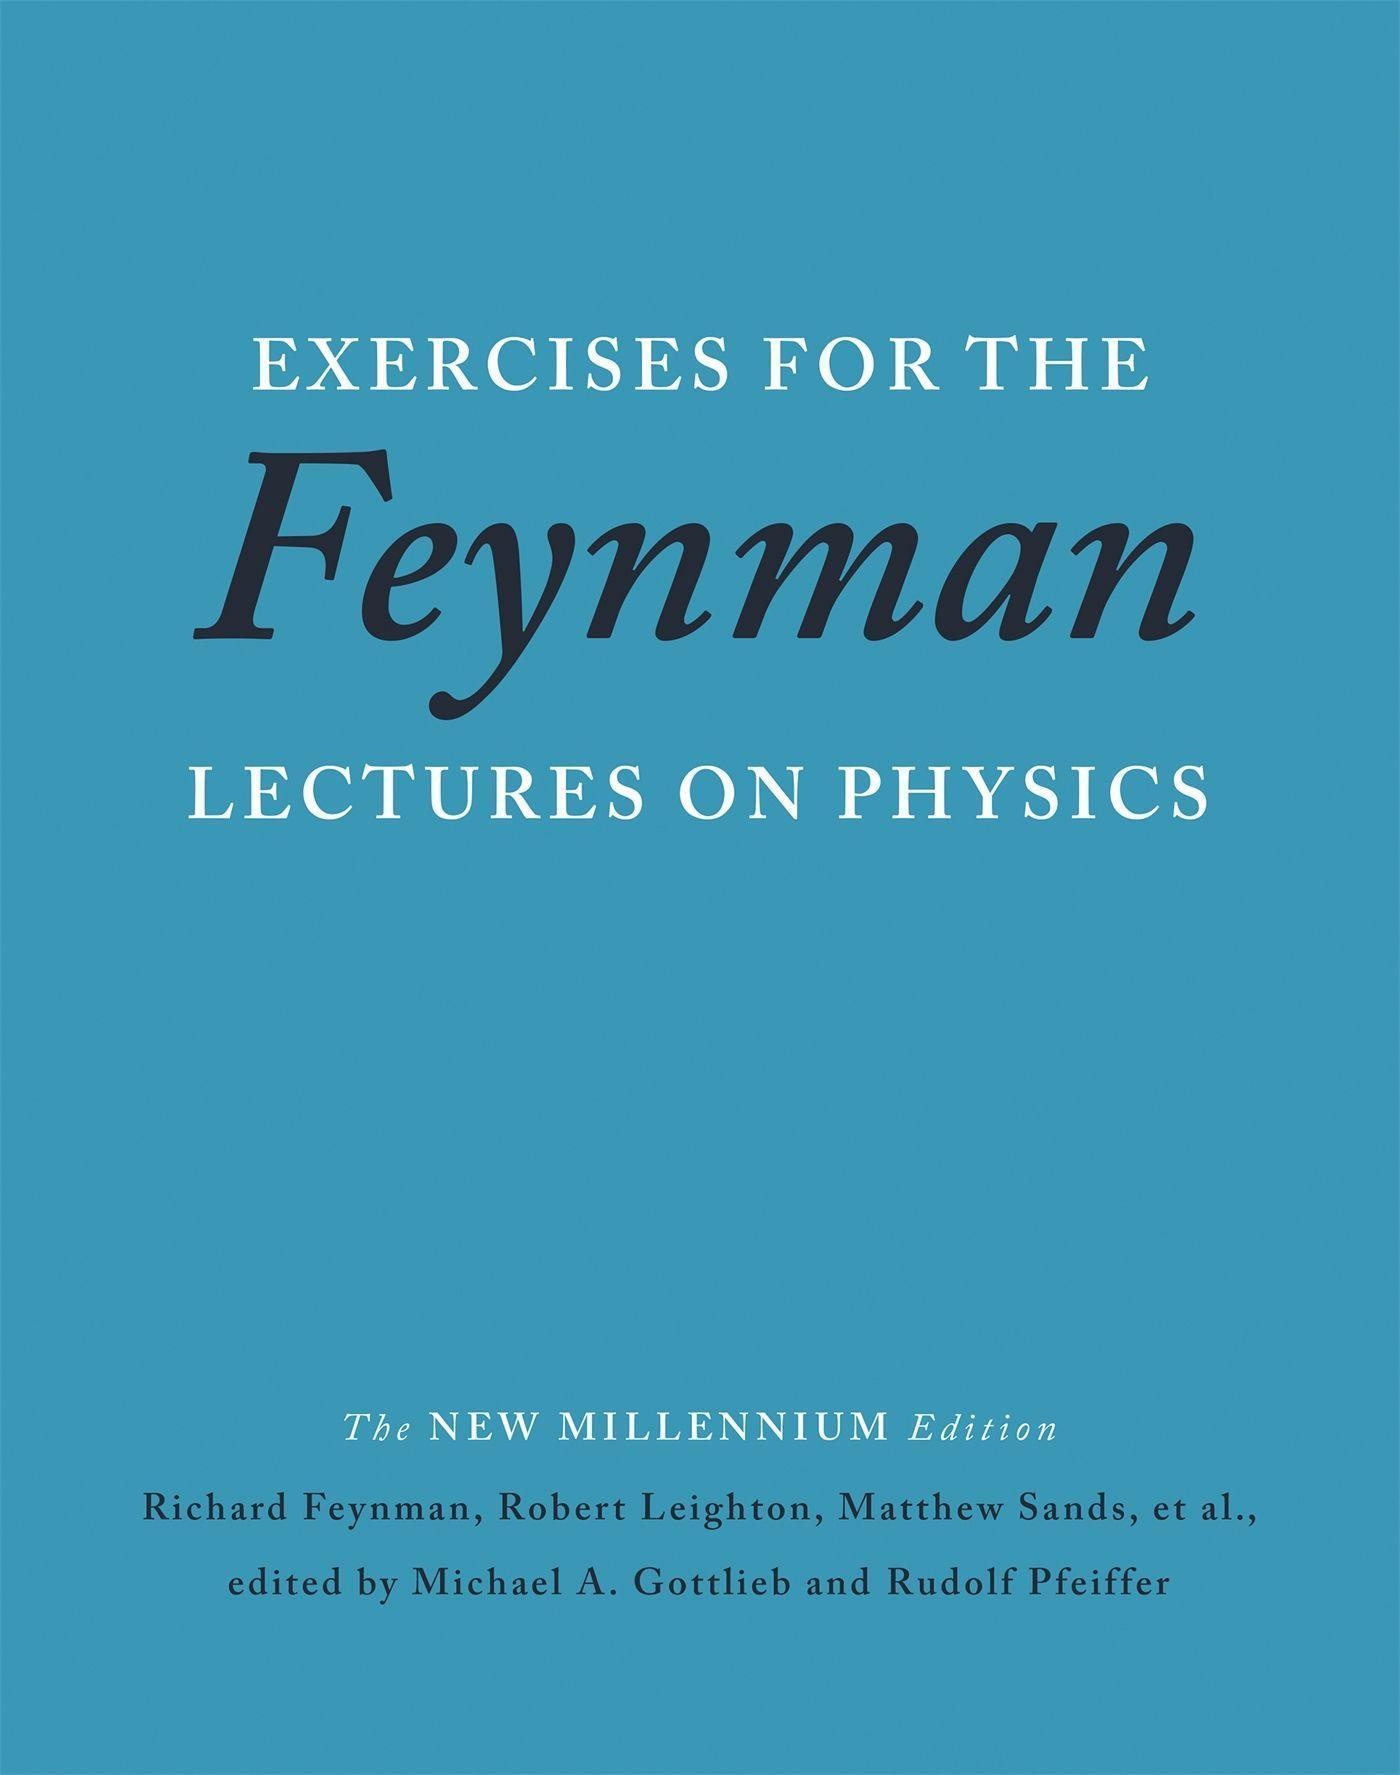 The Feynman Lectures On Physics  The New Millenium Edition: Tome Iv Exercises For The Feynman Lectures On Physics - Matthew Sands  Richard Feynman  Ro